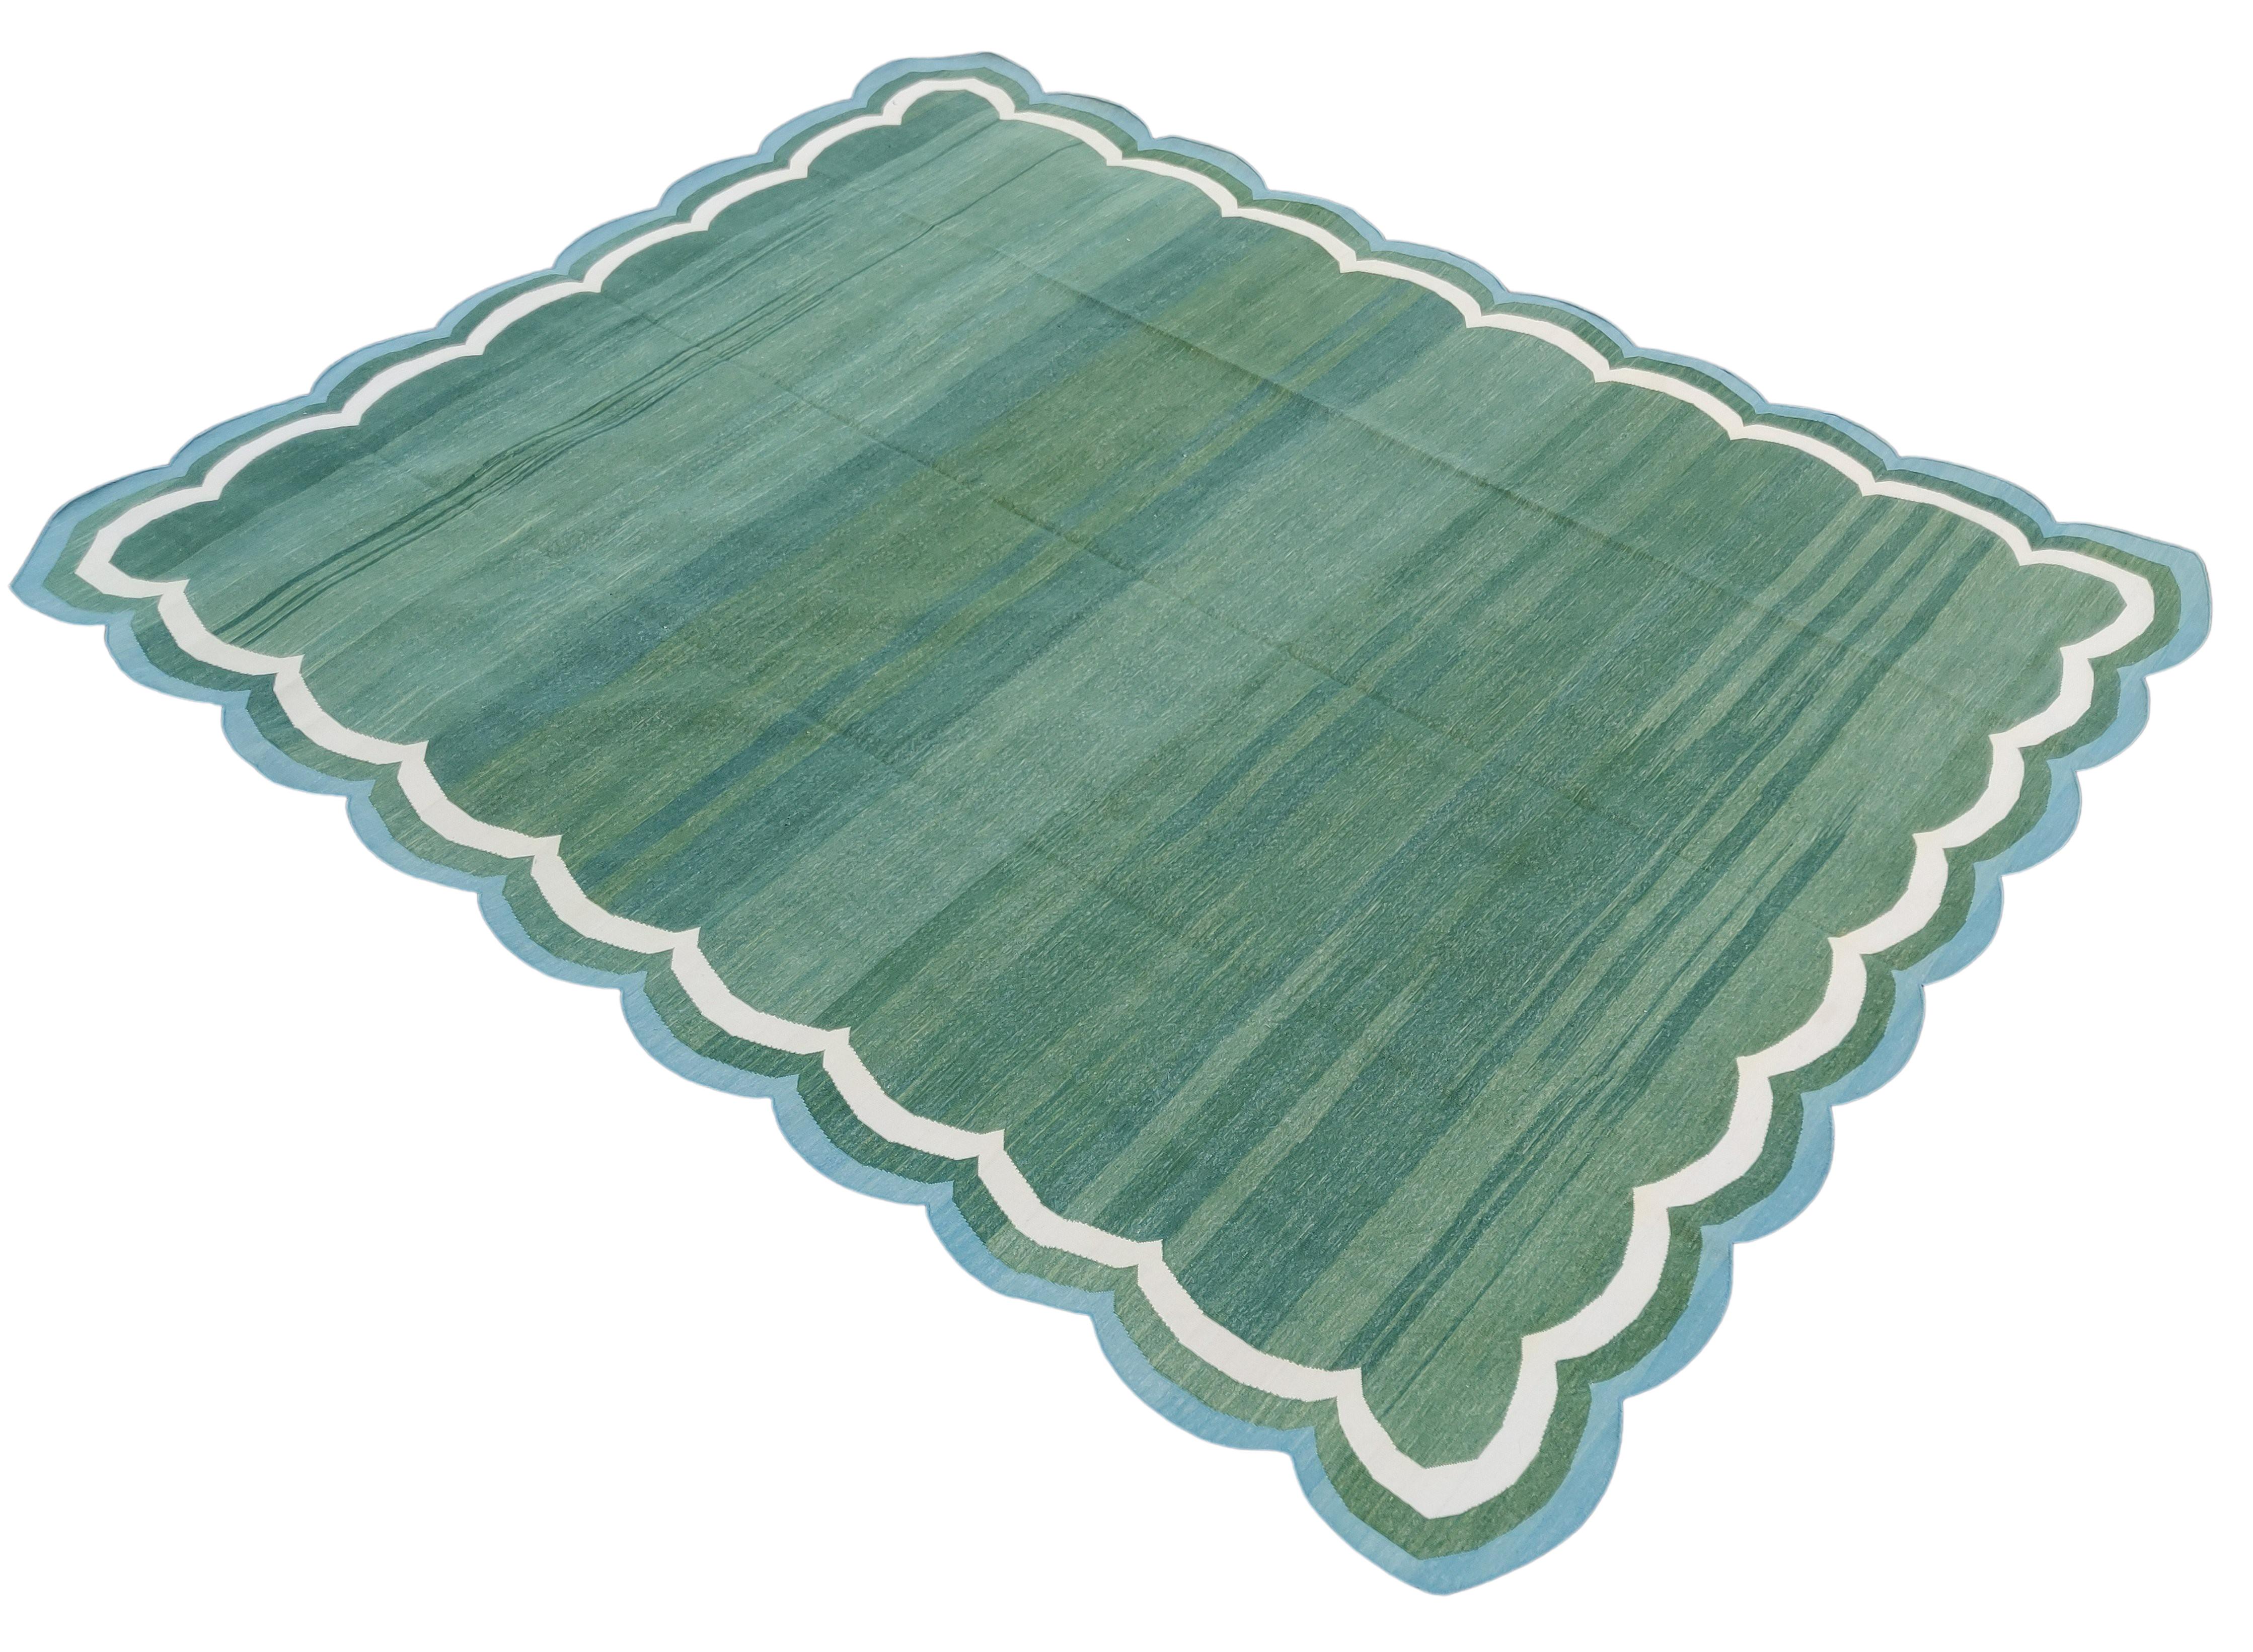 Handmade Cotton Flat Weave Rug, 8x10 Green And Blue Scalloped Indian Dhurrie Rug For Sale 5